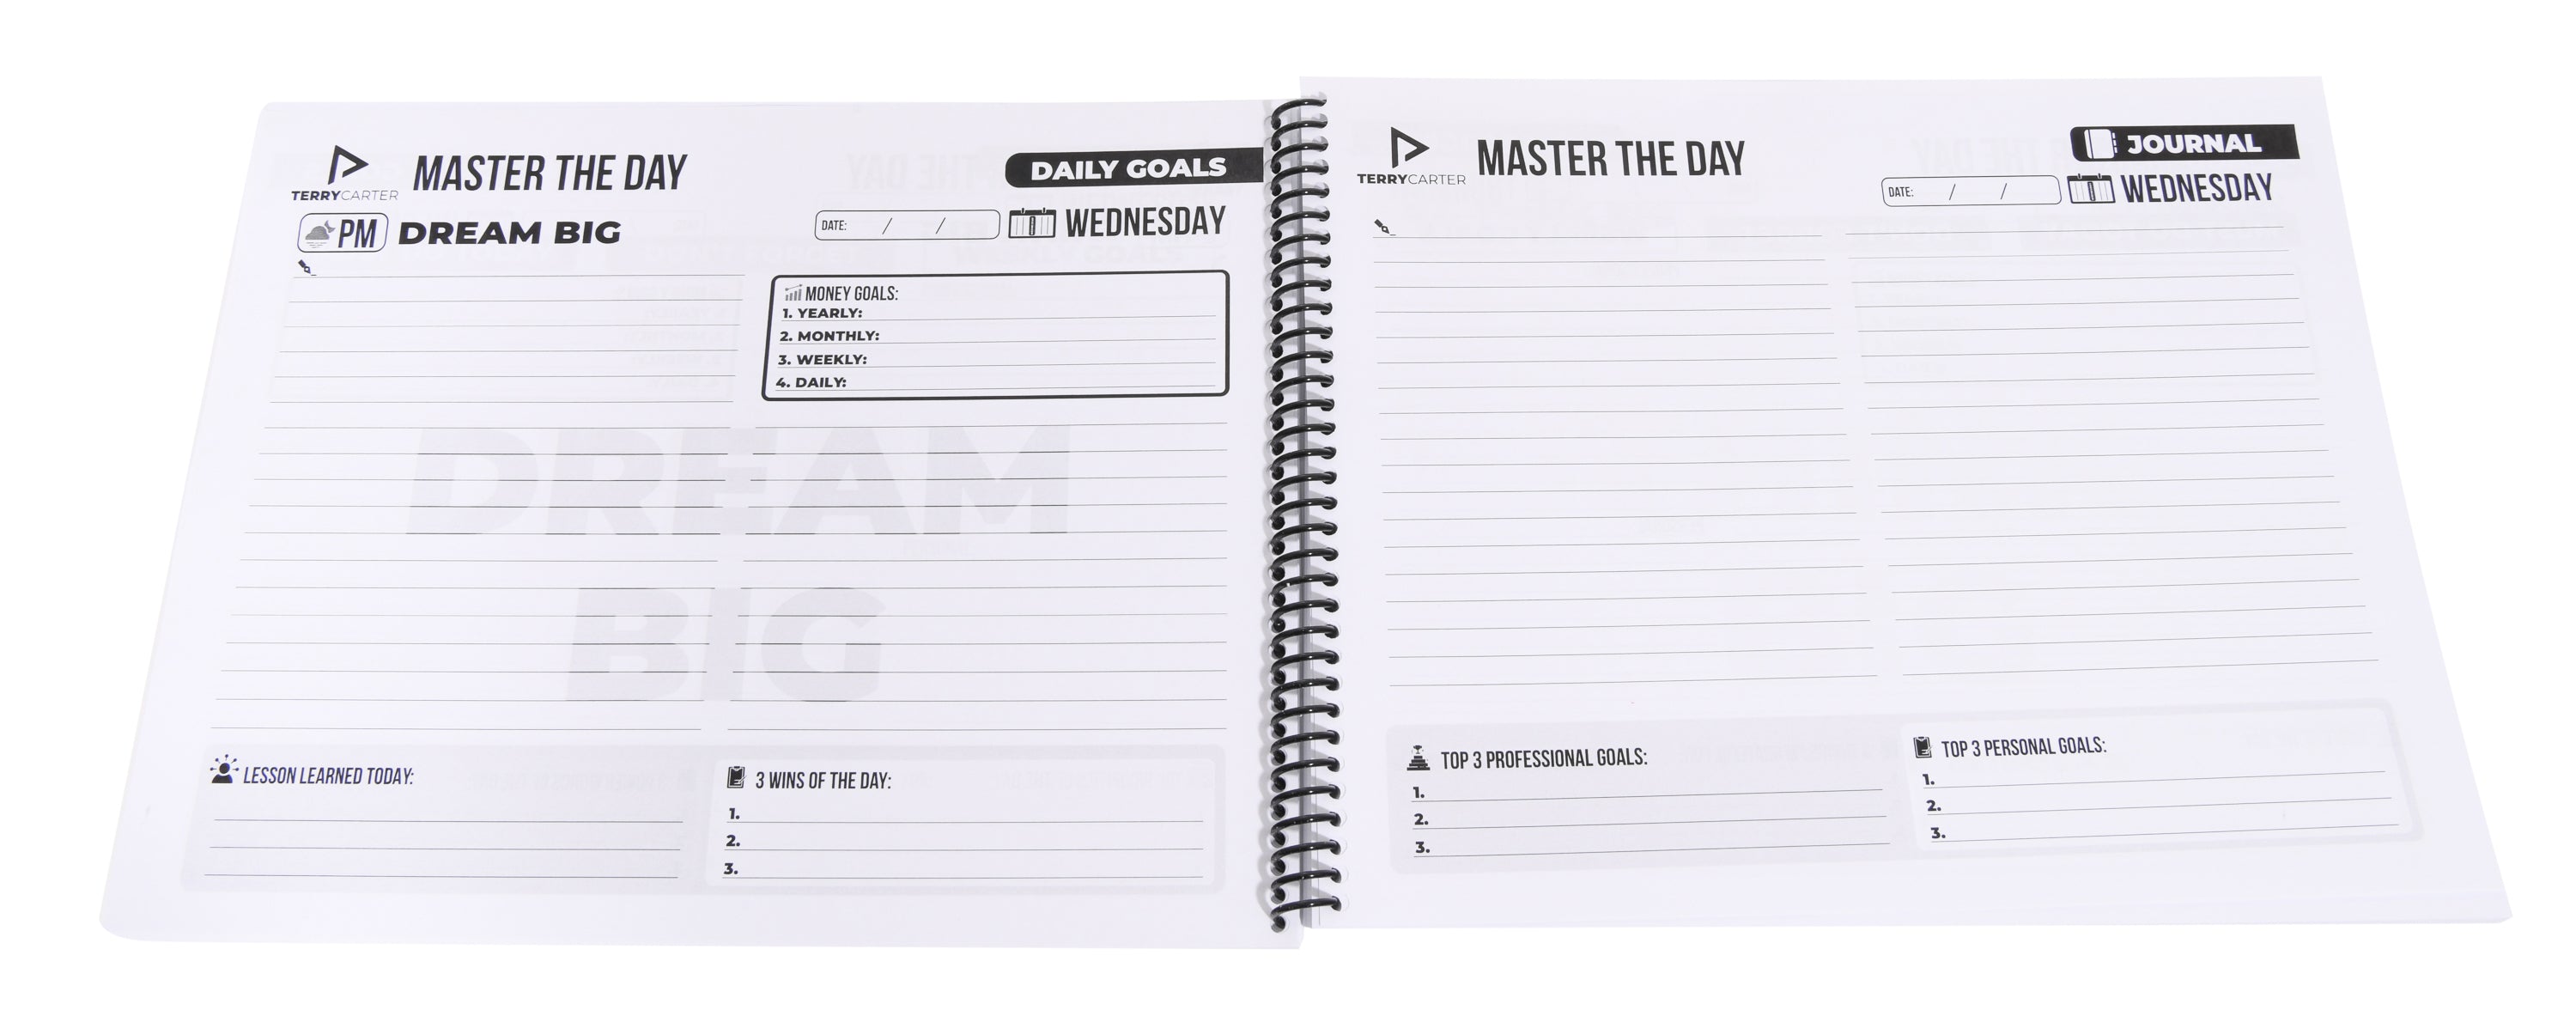 Terry Carter Monthly Planner